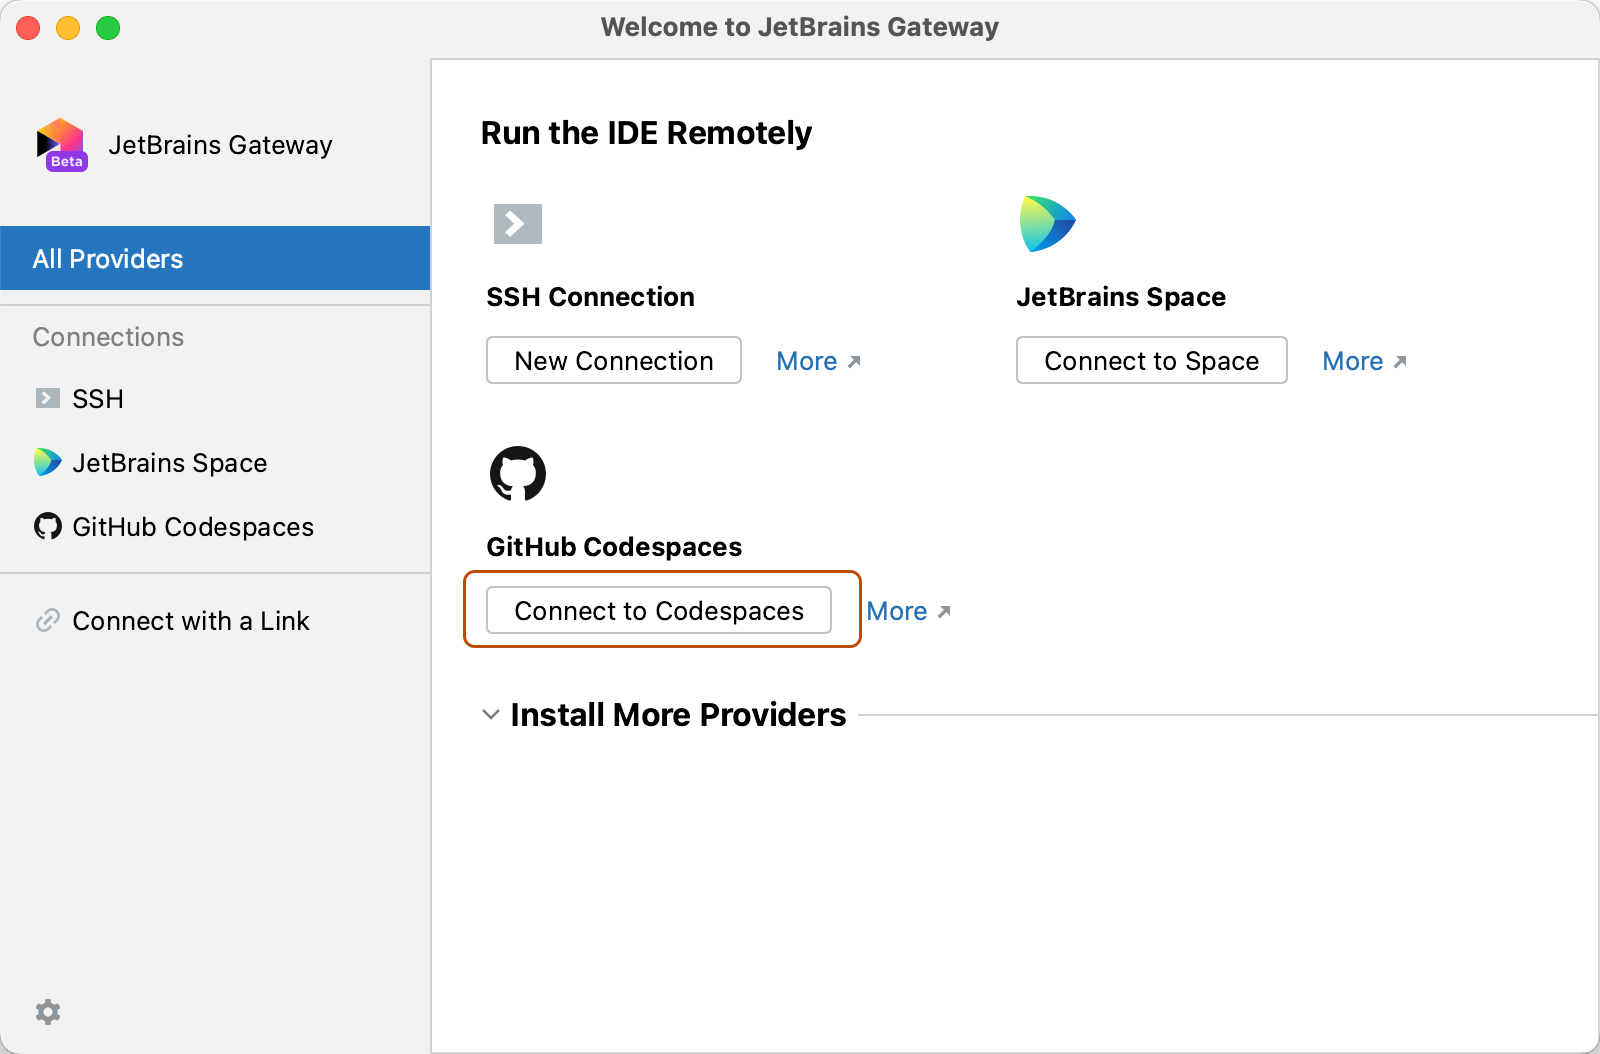 Screenshot of the JetBrains Gateway home page, showing the "Connect to Codespaces" button.